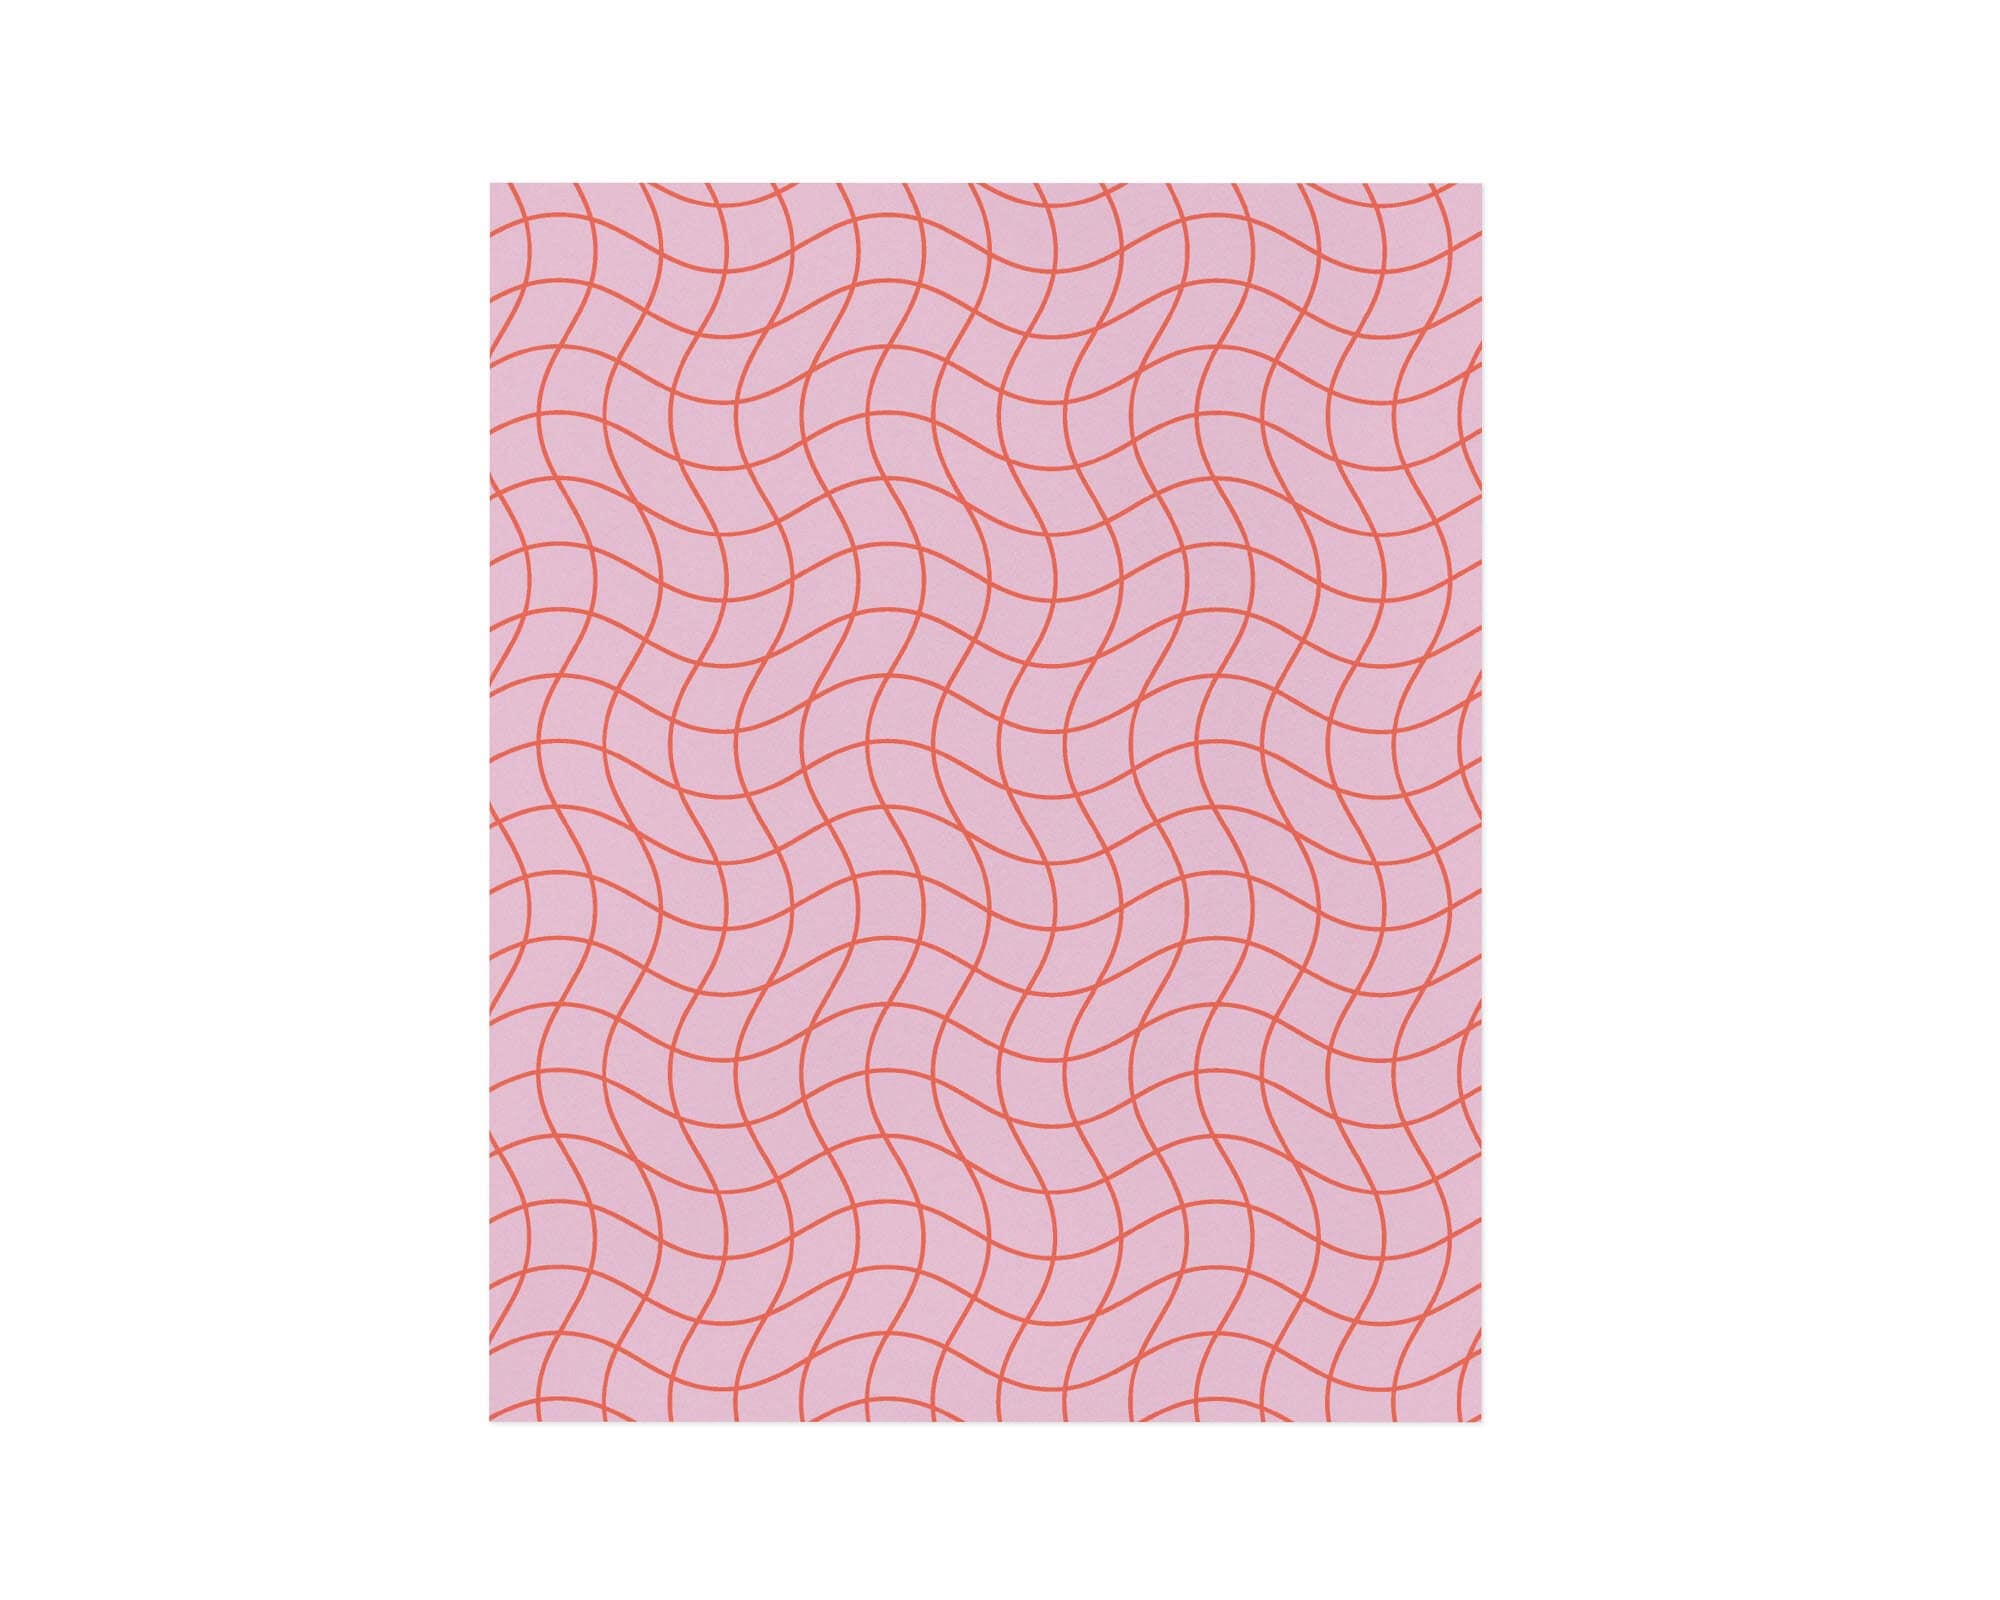 "La Grid En Rose" archival giclée art print in a wavy red and pink grid pattern that bends space and time. Made in USA by My Darlin' @mydarlin_bk